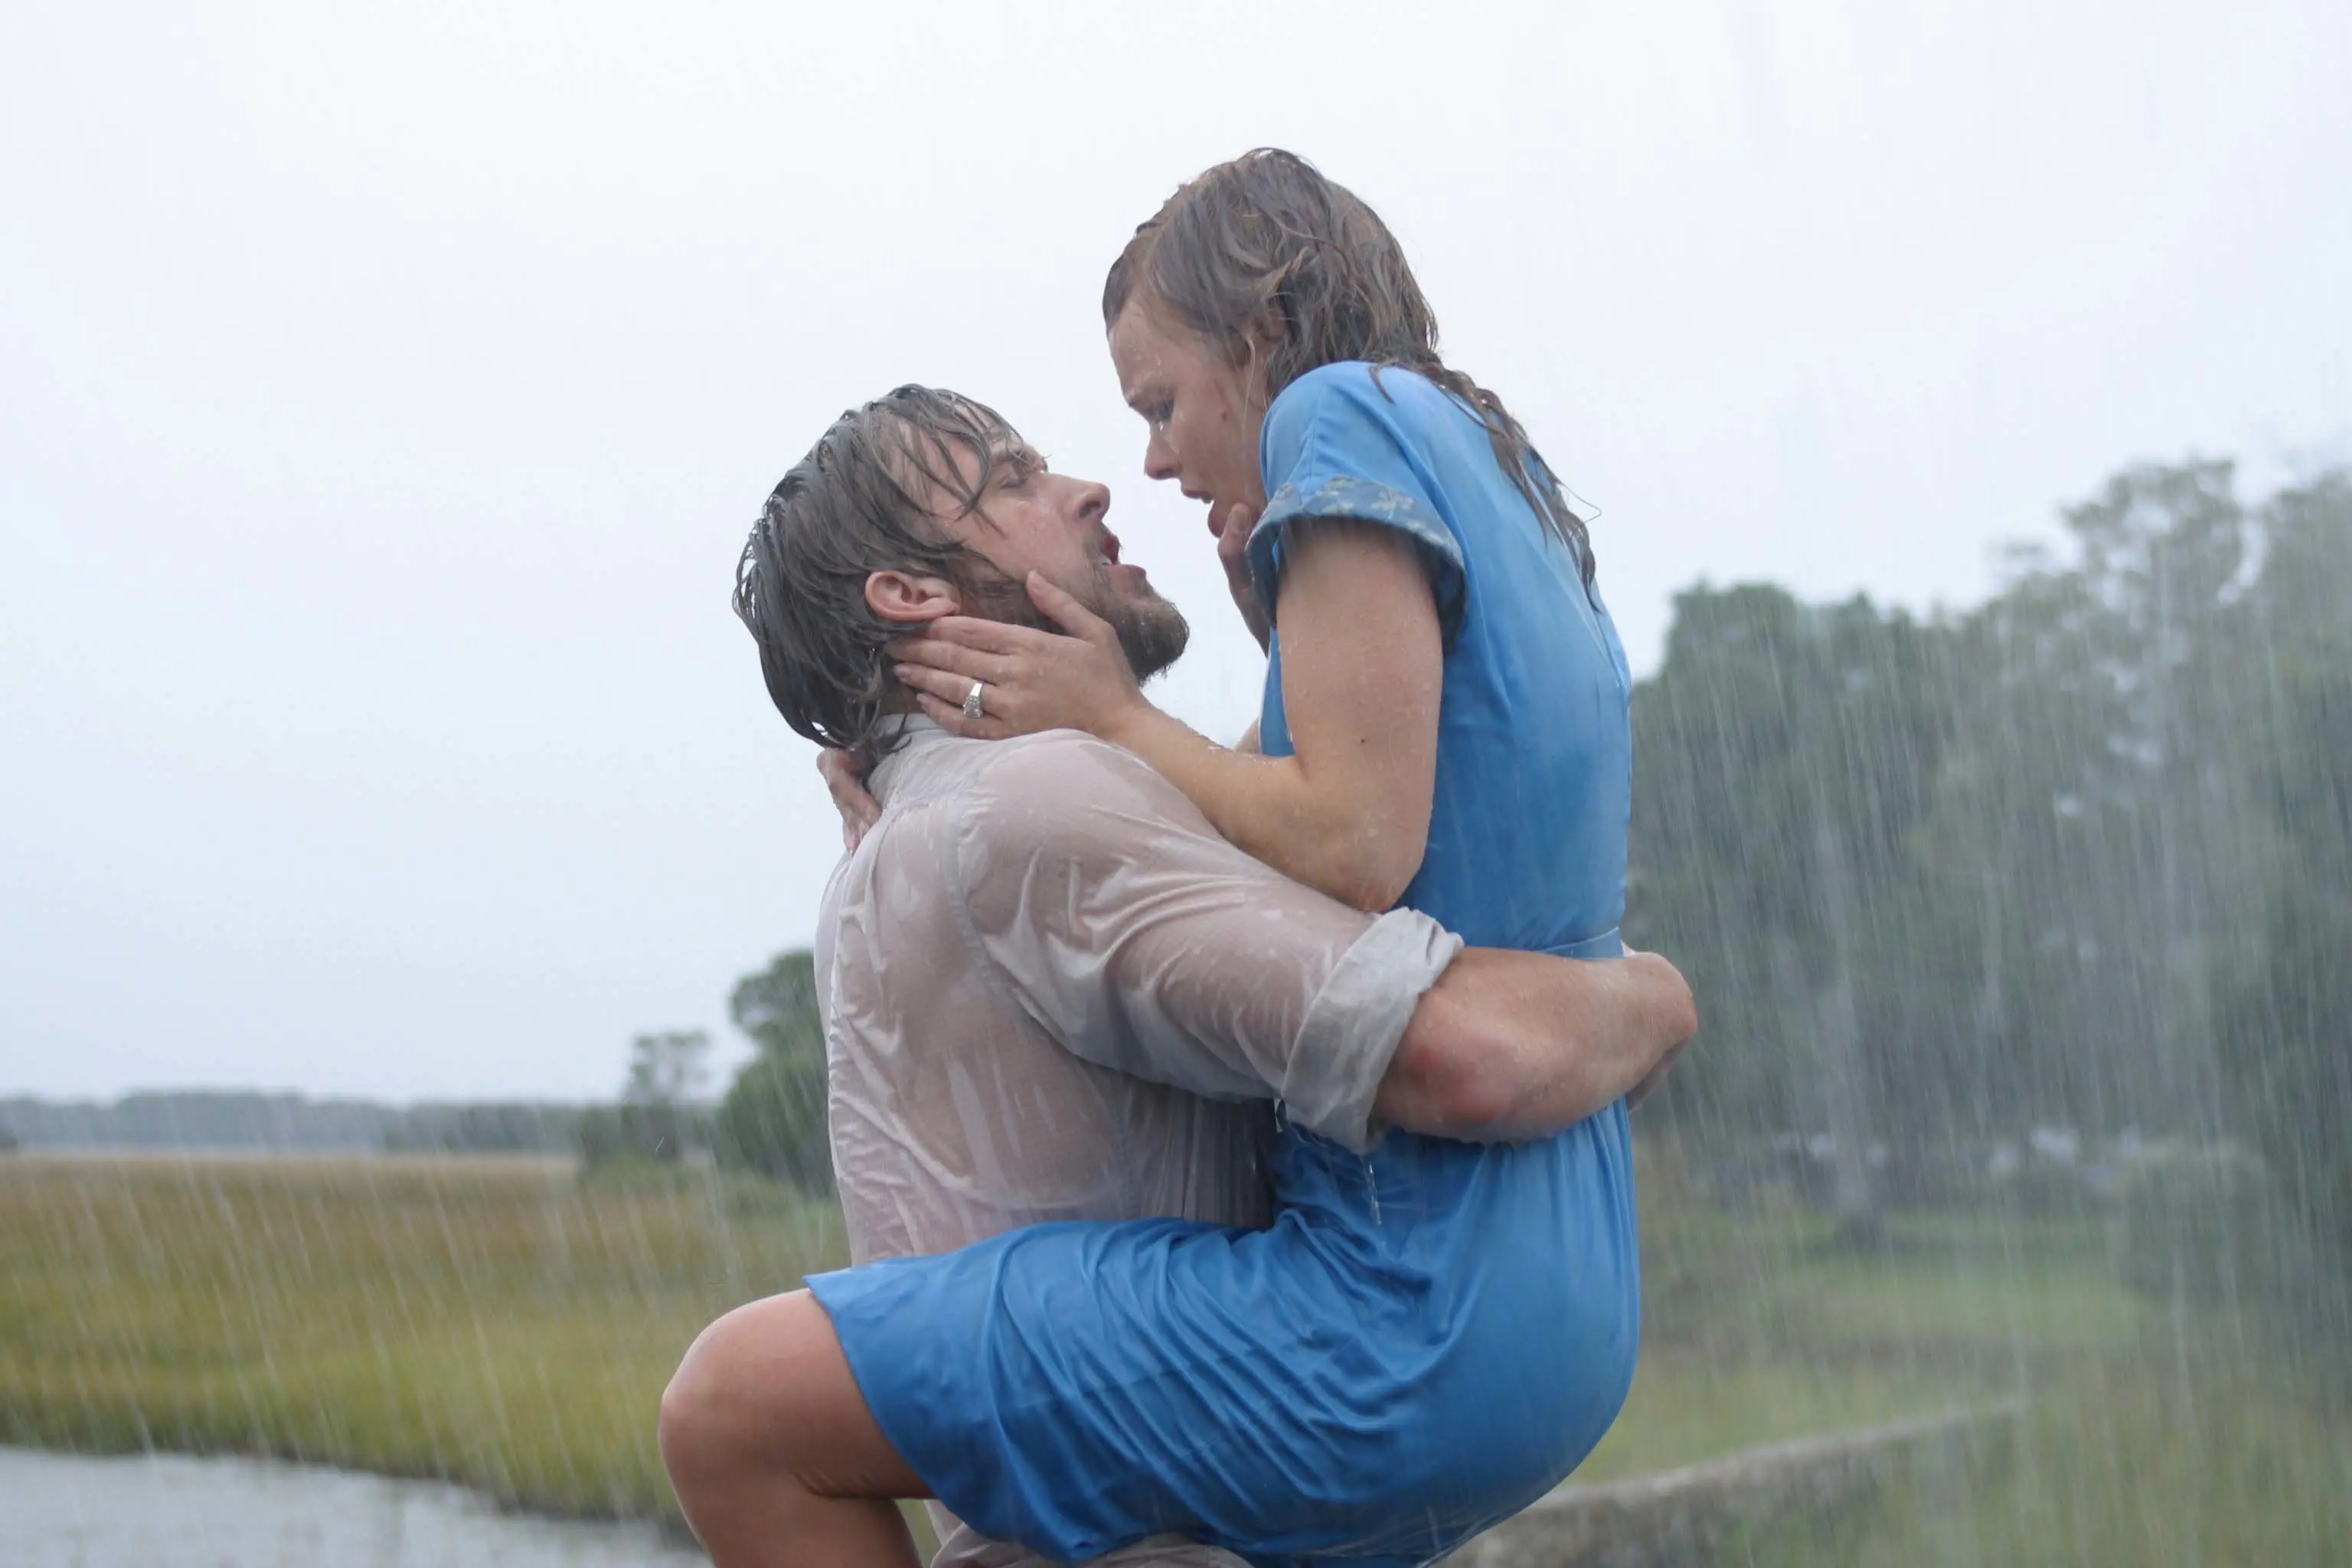 'The Notebook'